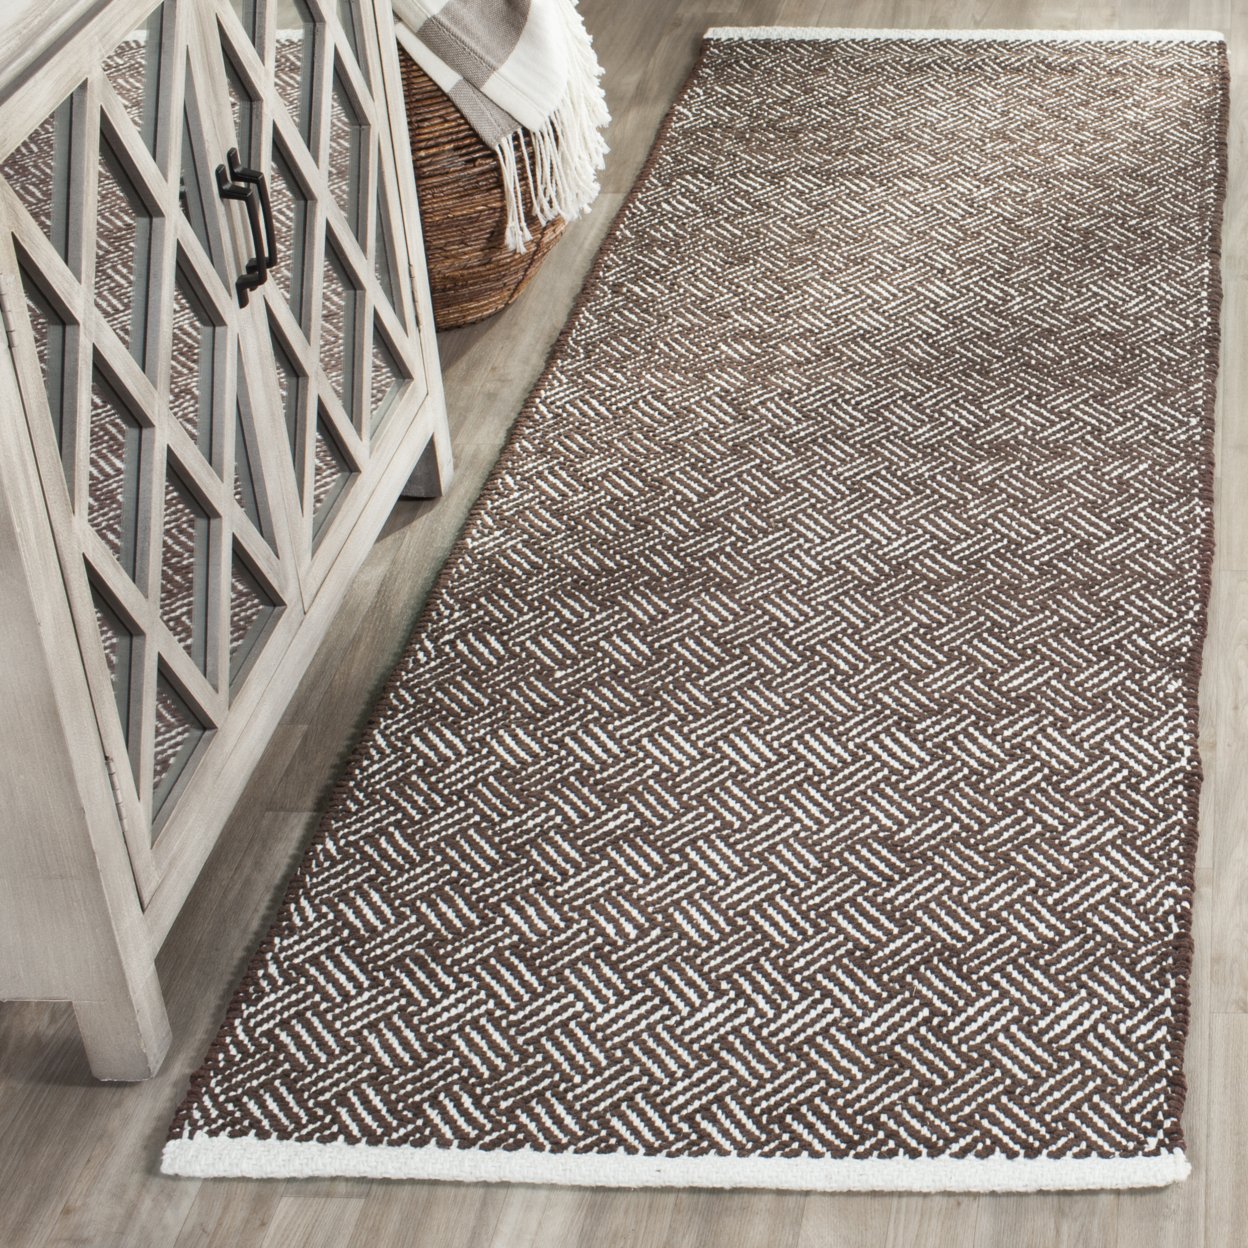 SAFAVIEH Boston Collection BOS680A Handwoven Brown Rug - 4' Square